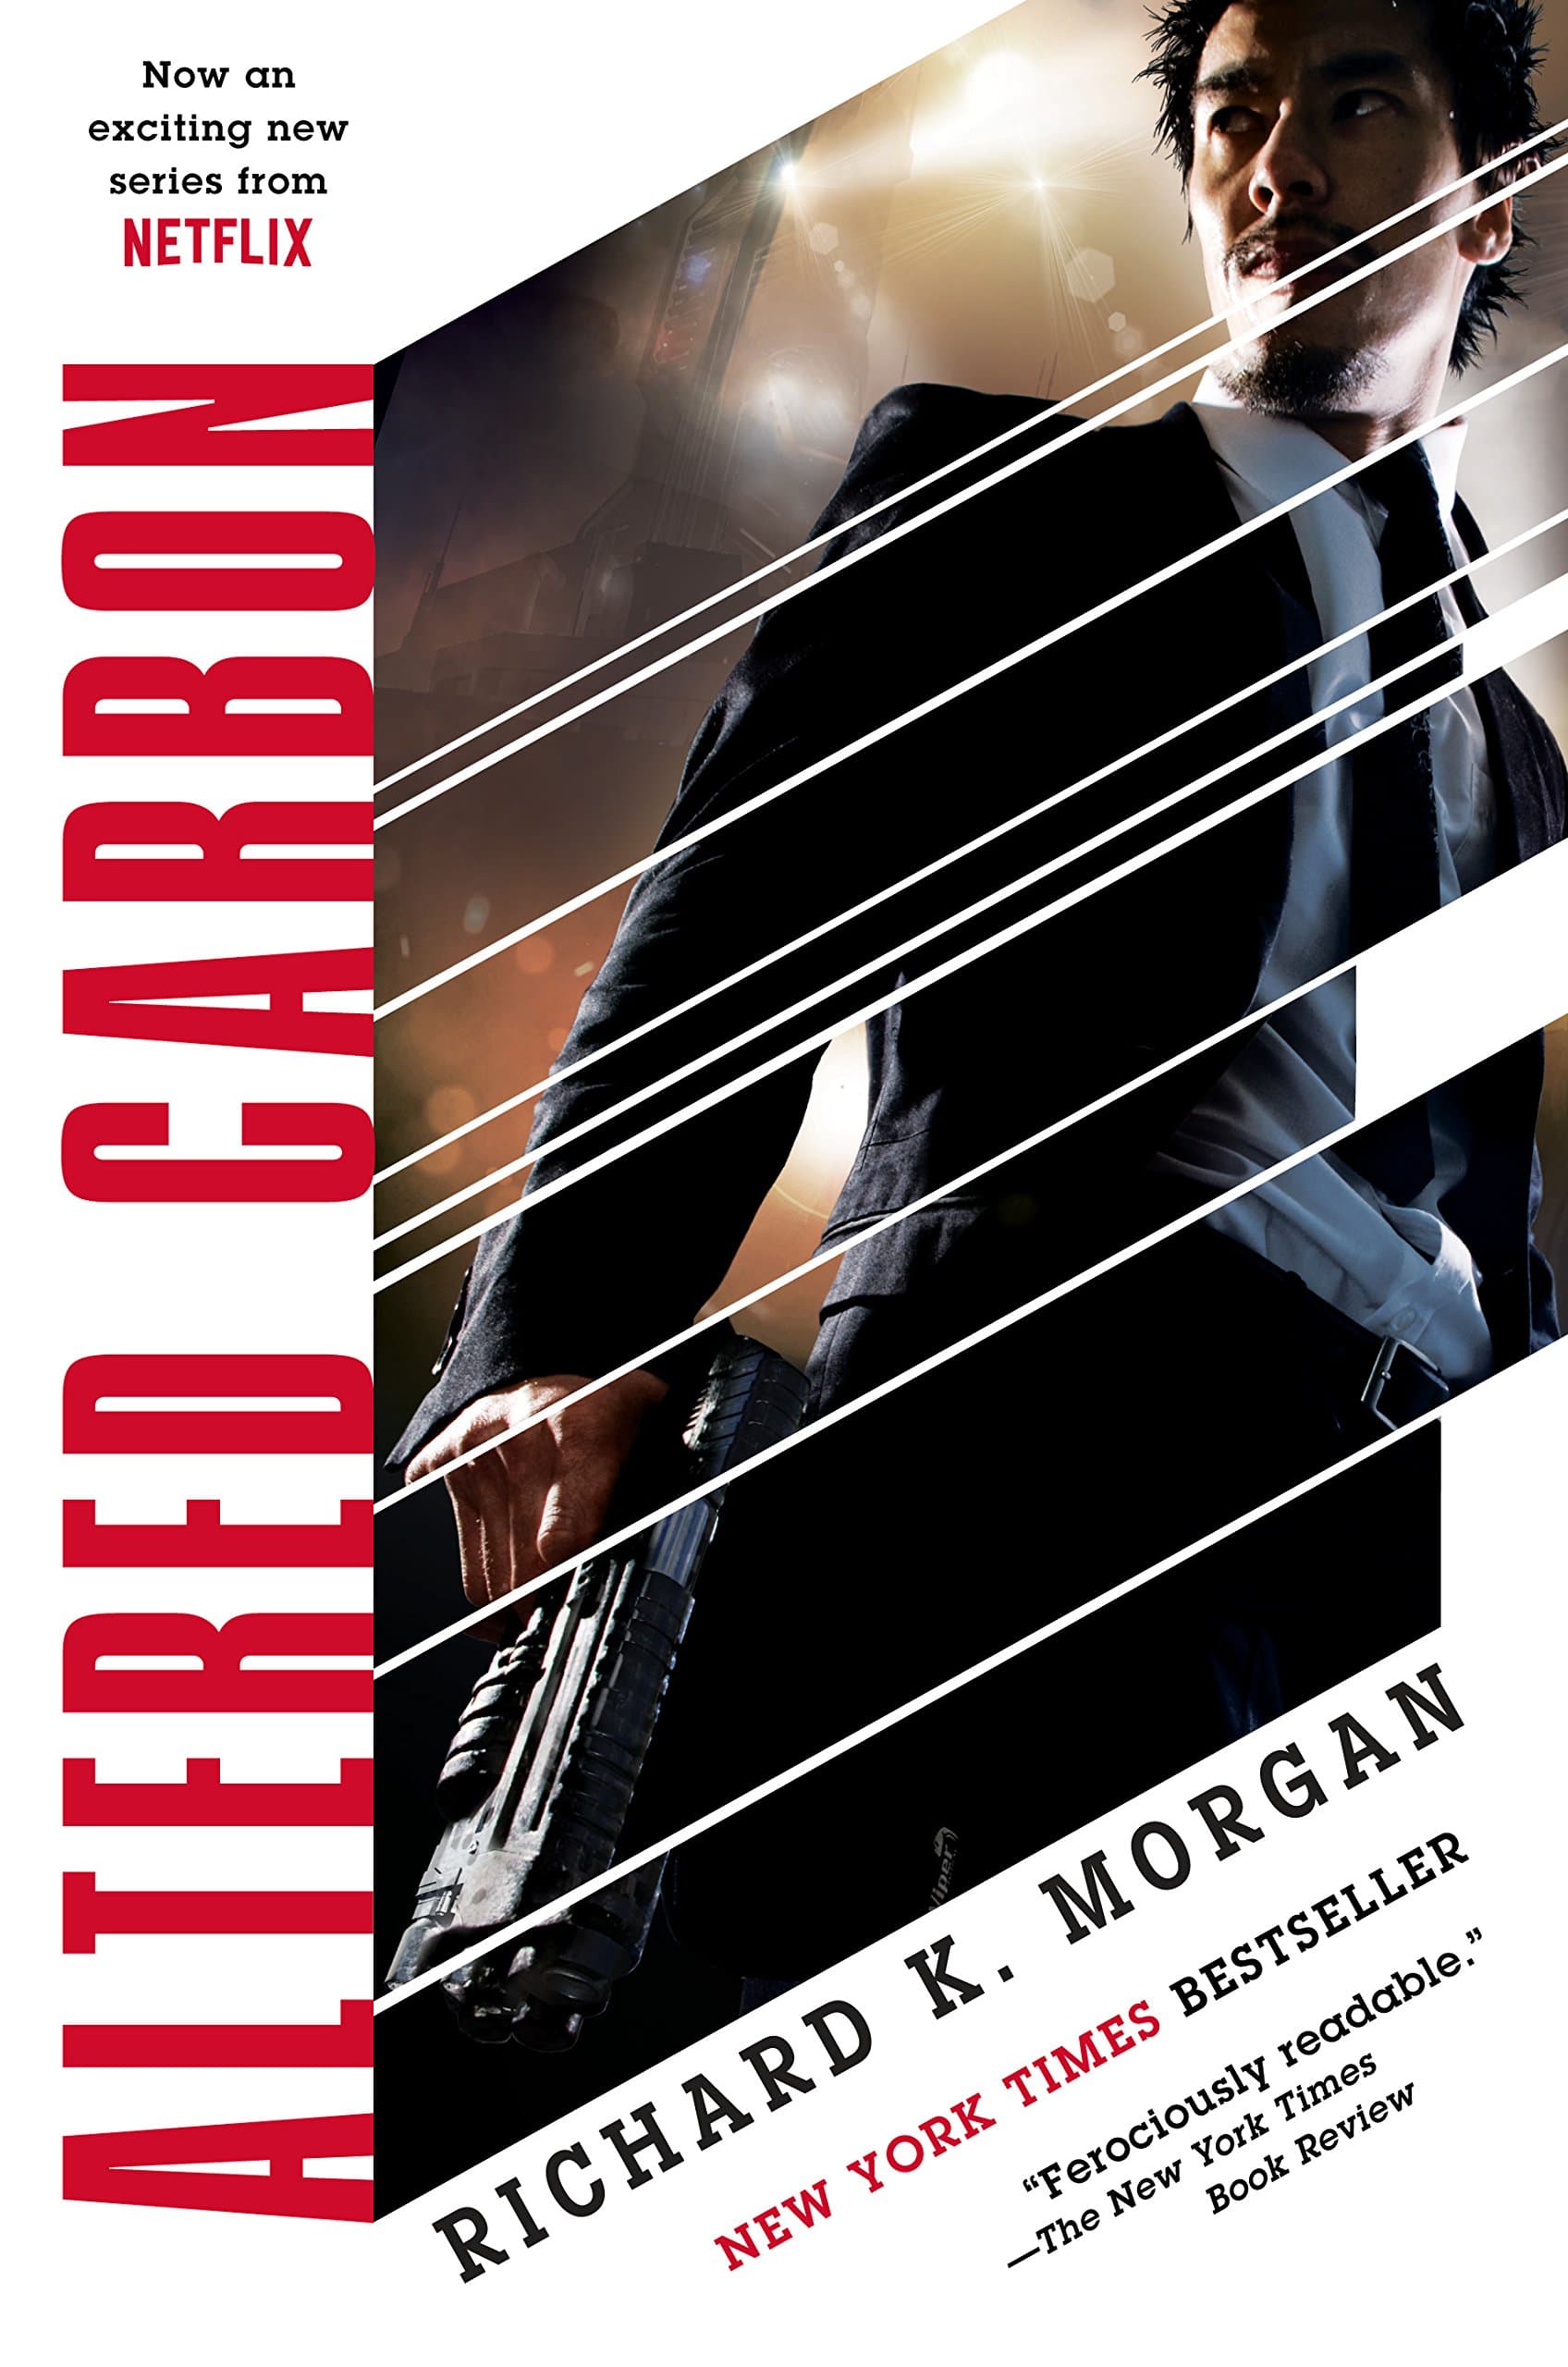 The cover of Altered Carbon